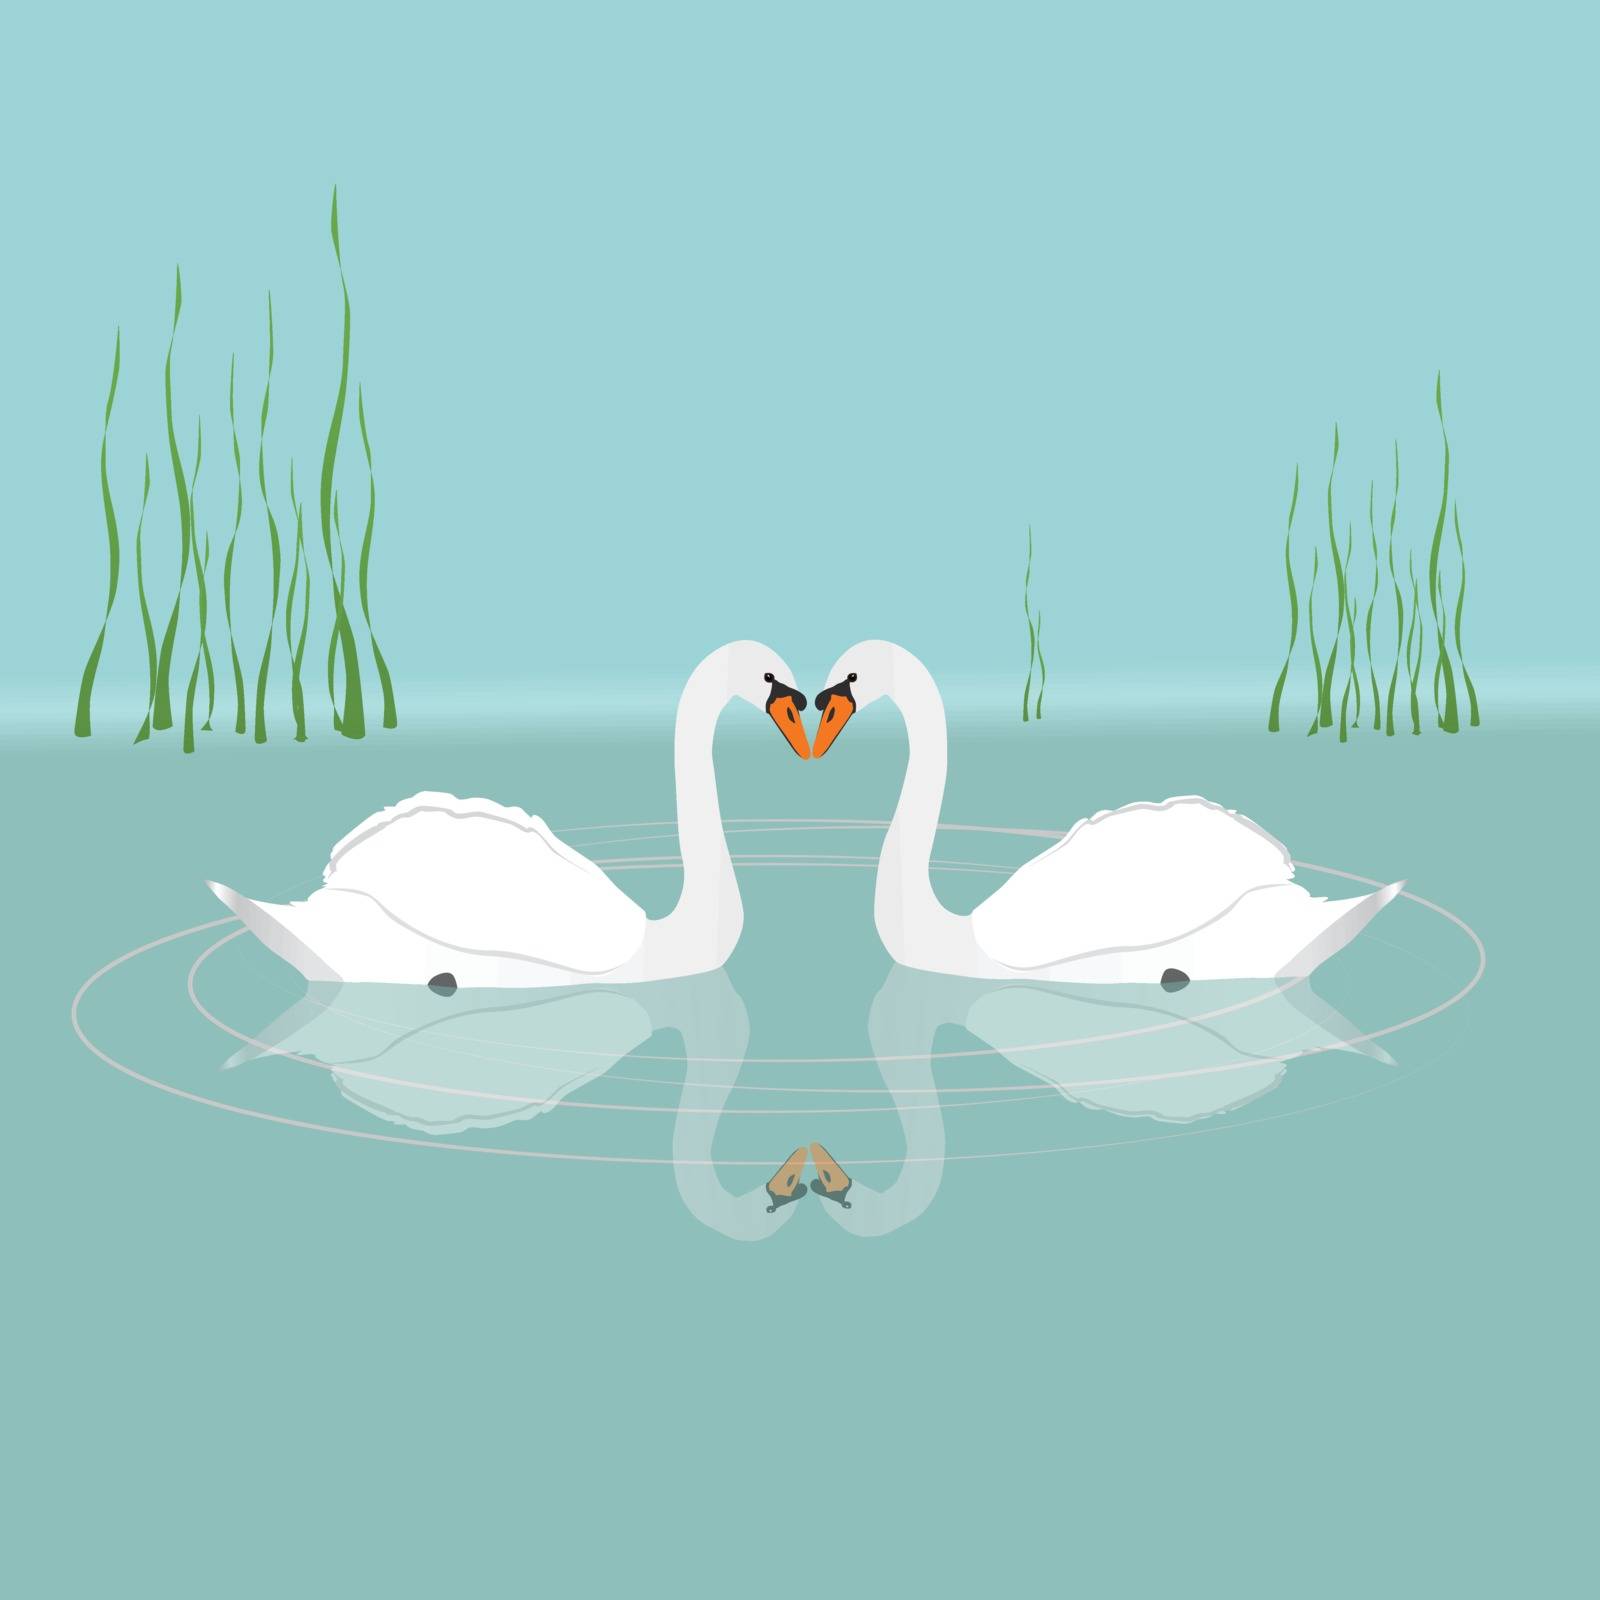 Two Mute swans swimming in the water. They seem to kiss. In the background are reeds.